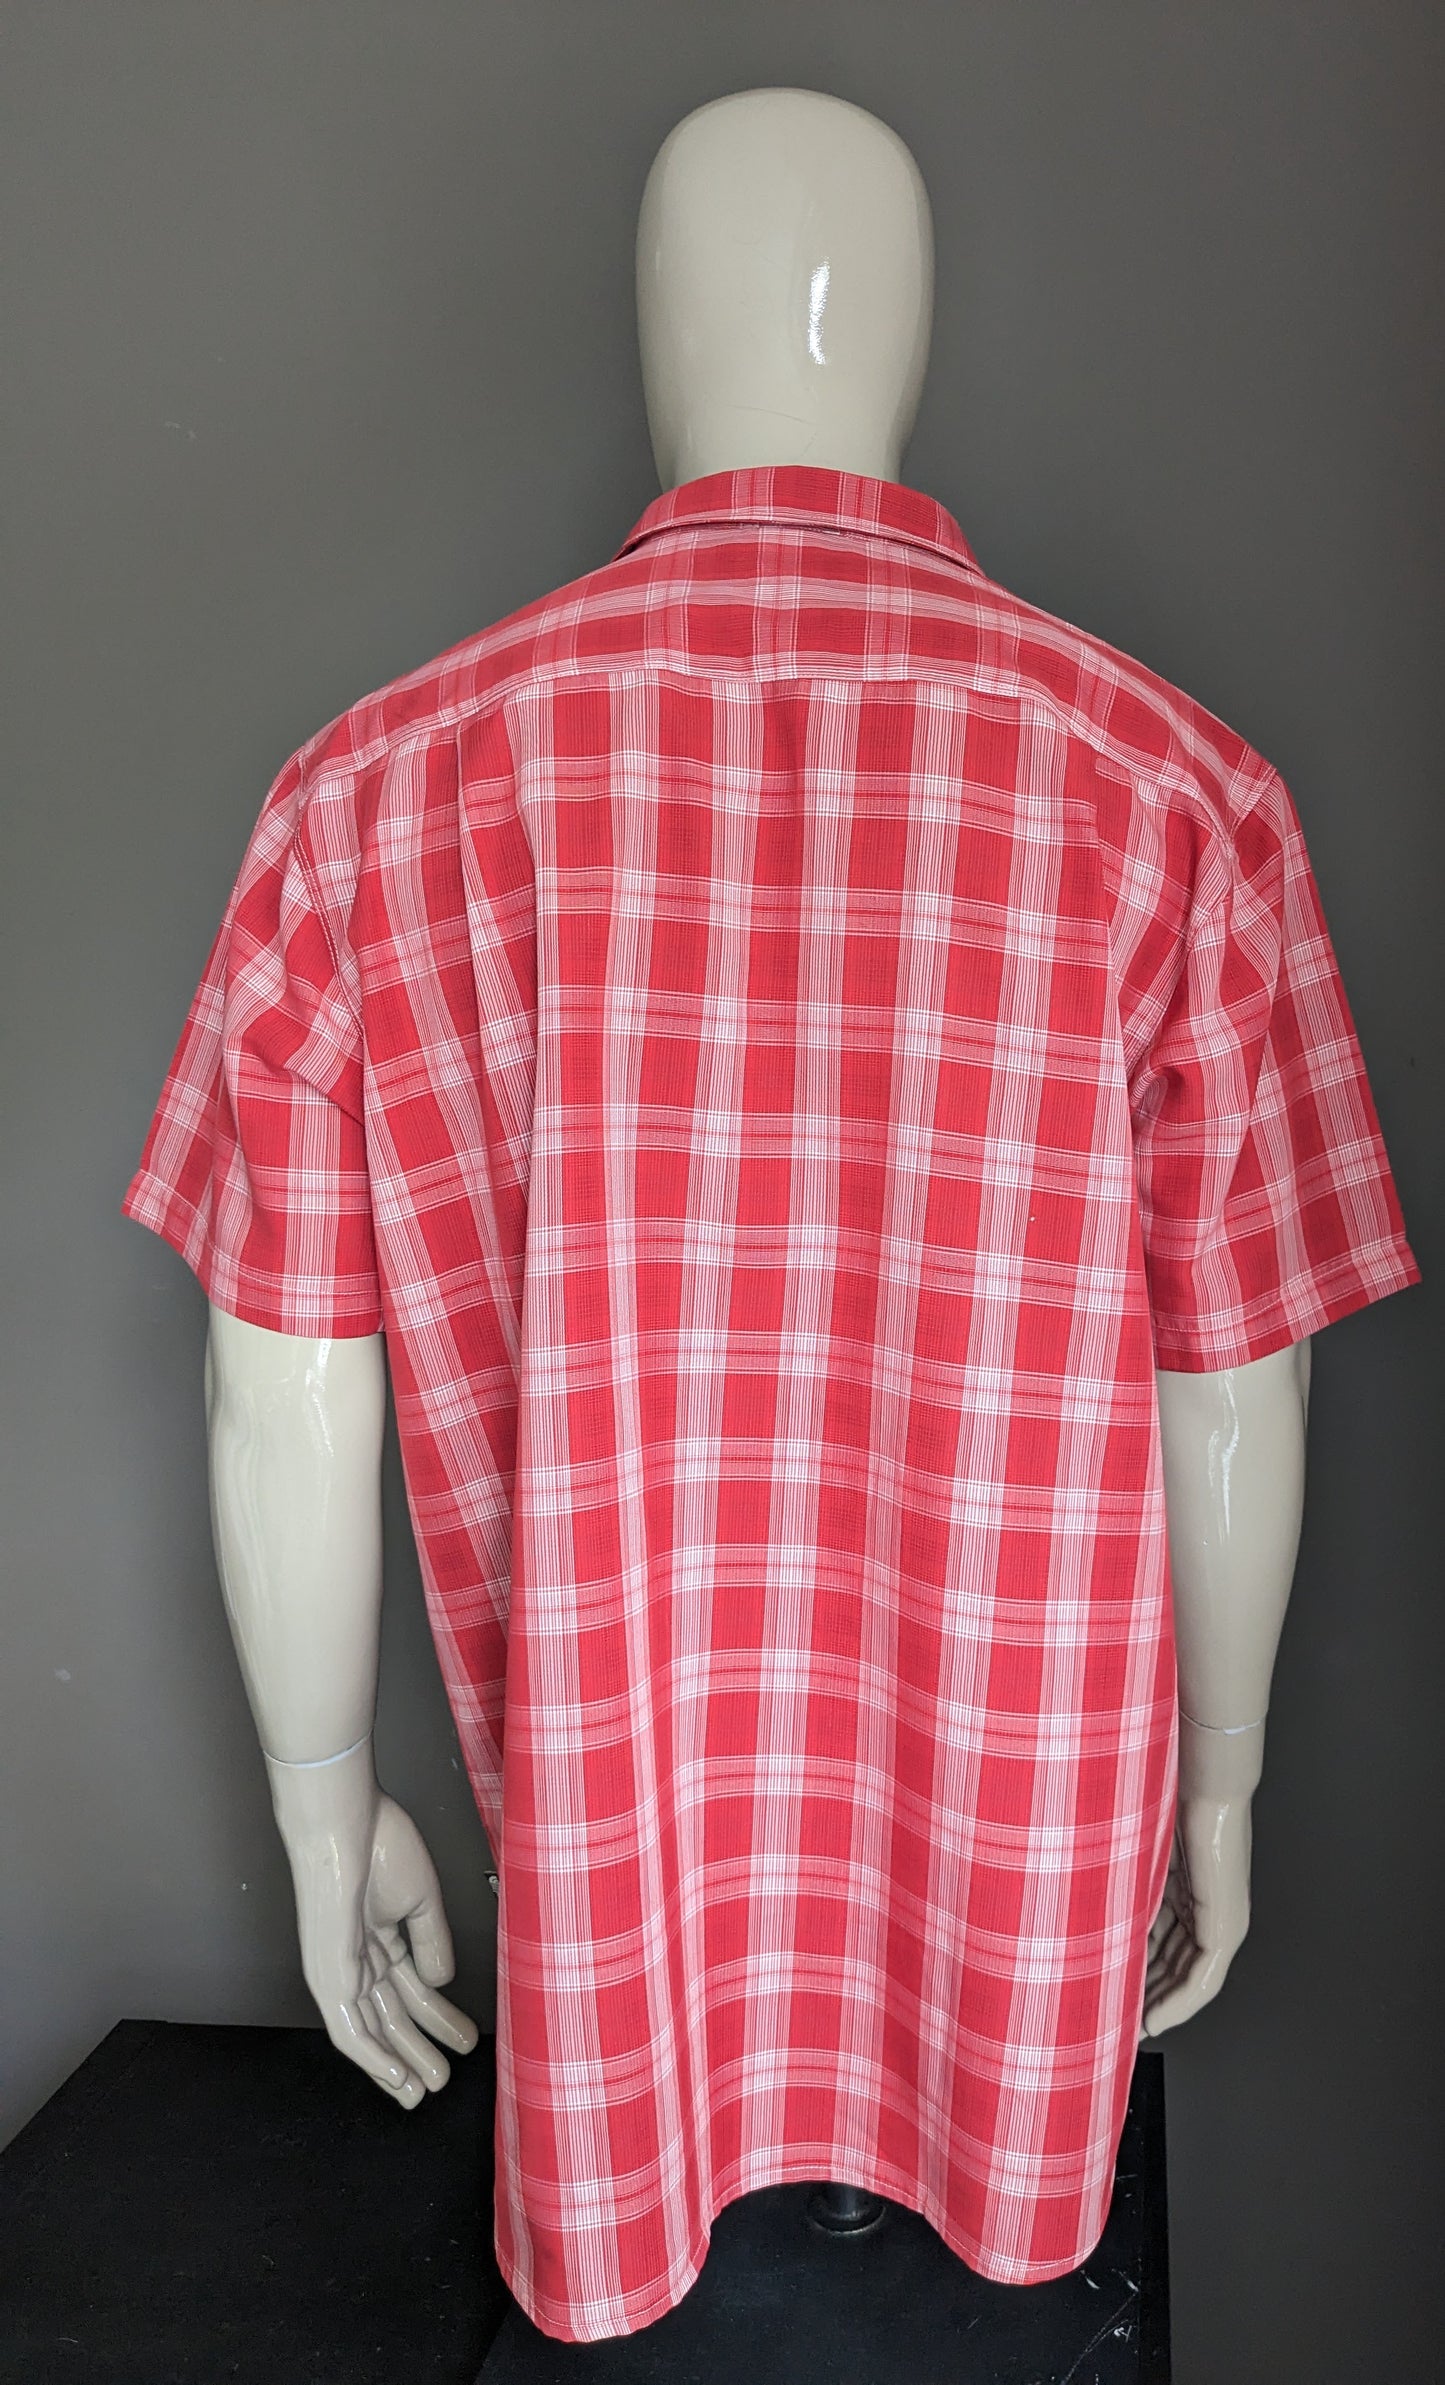 The North Face Outdoor Shirt Short Sleeve. Red white checkered. Size 2XL / XXL.